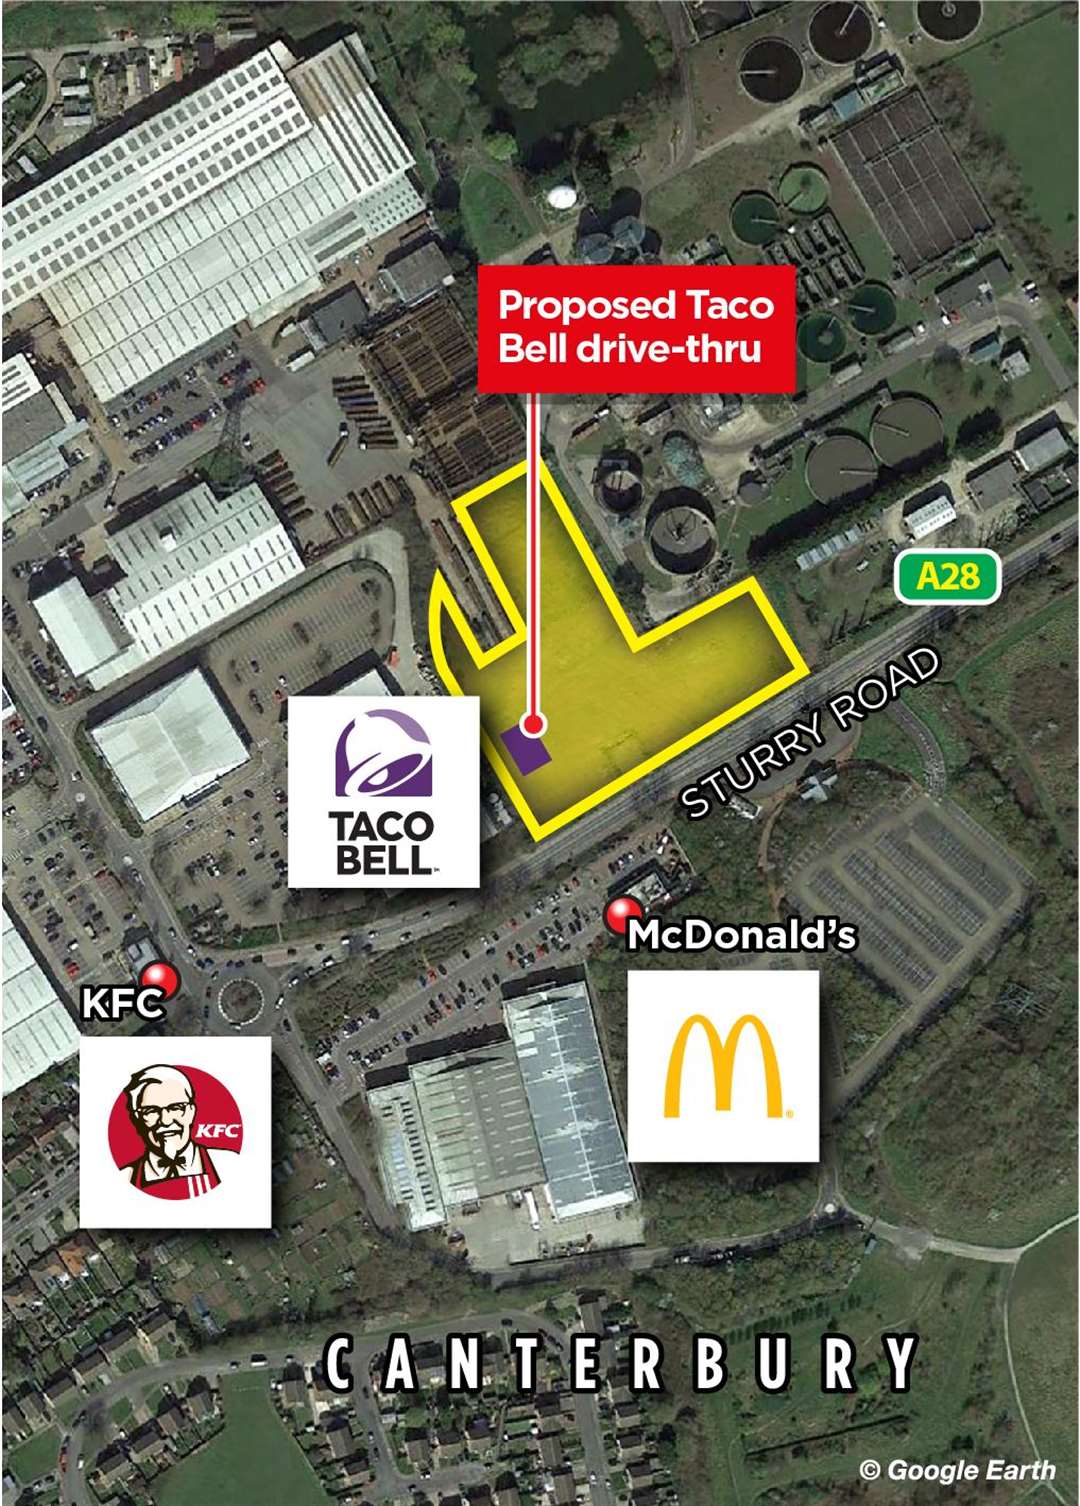 The Taco Bell off Sturry Road will be located near to KFC and McDonald's